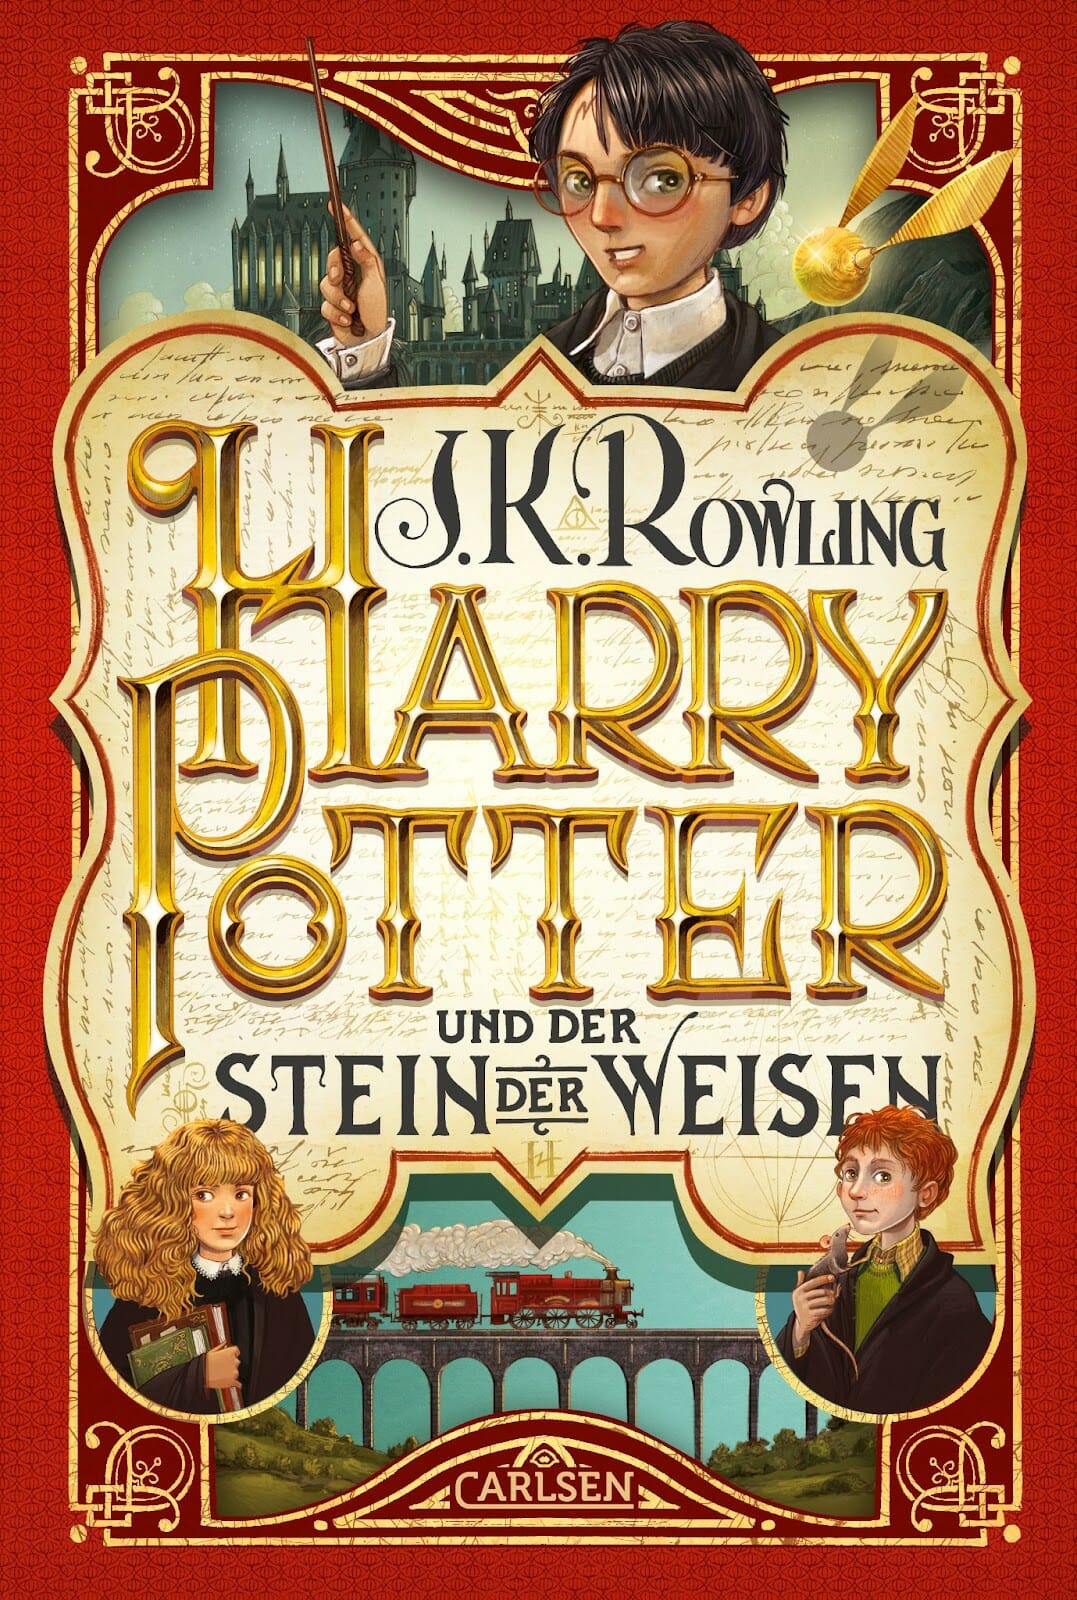 Harry Potter book cover from Germany